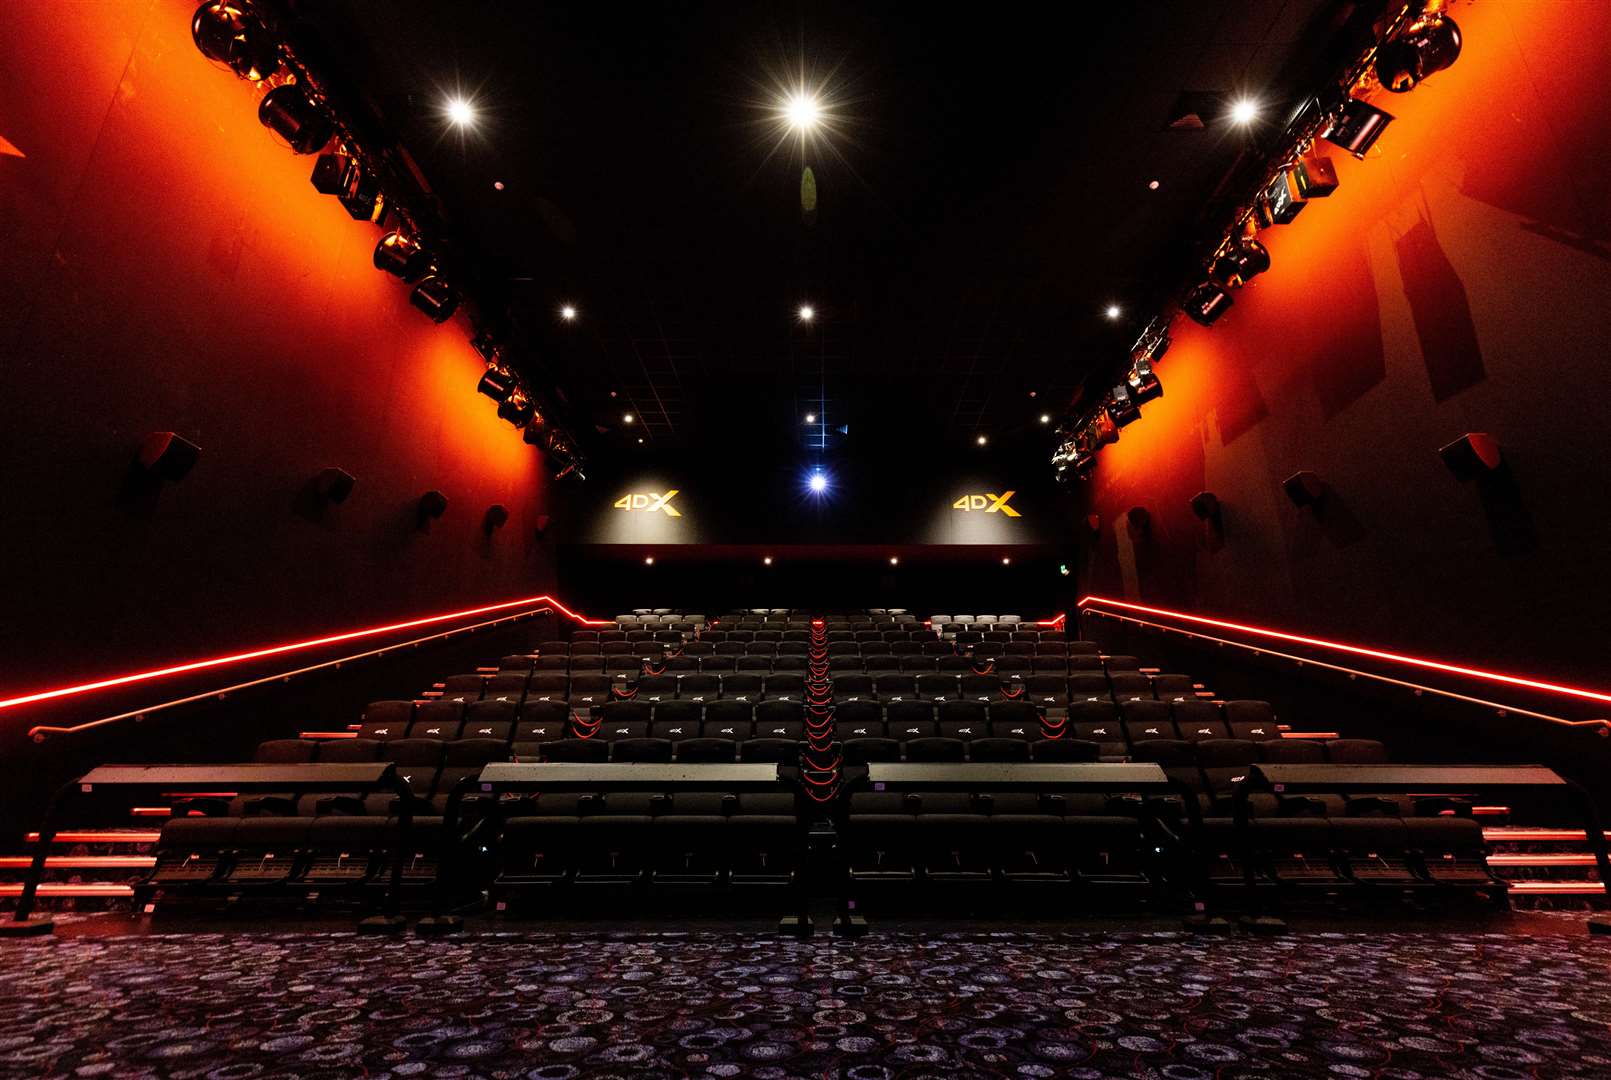 The 4DX screen is the first of its kind in Kent. Picture: Andrew Fosker / PinPep